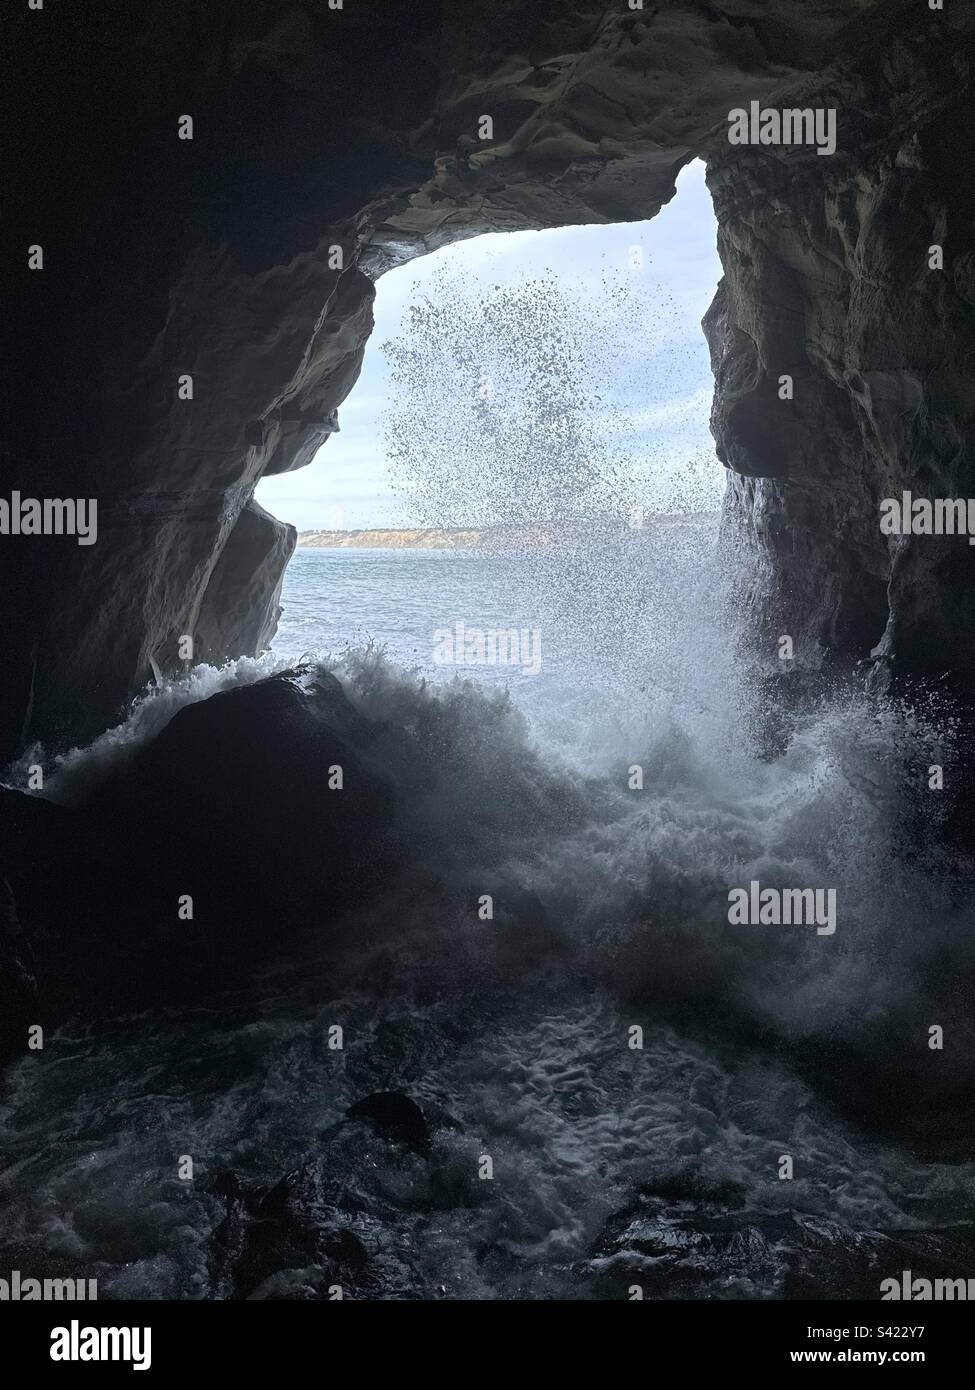 VlLoojing out from inside the Sunny Jim Cave in La Jolla, California, as a wave breaks on the rocks. Stock Photo